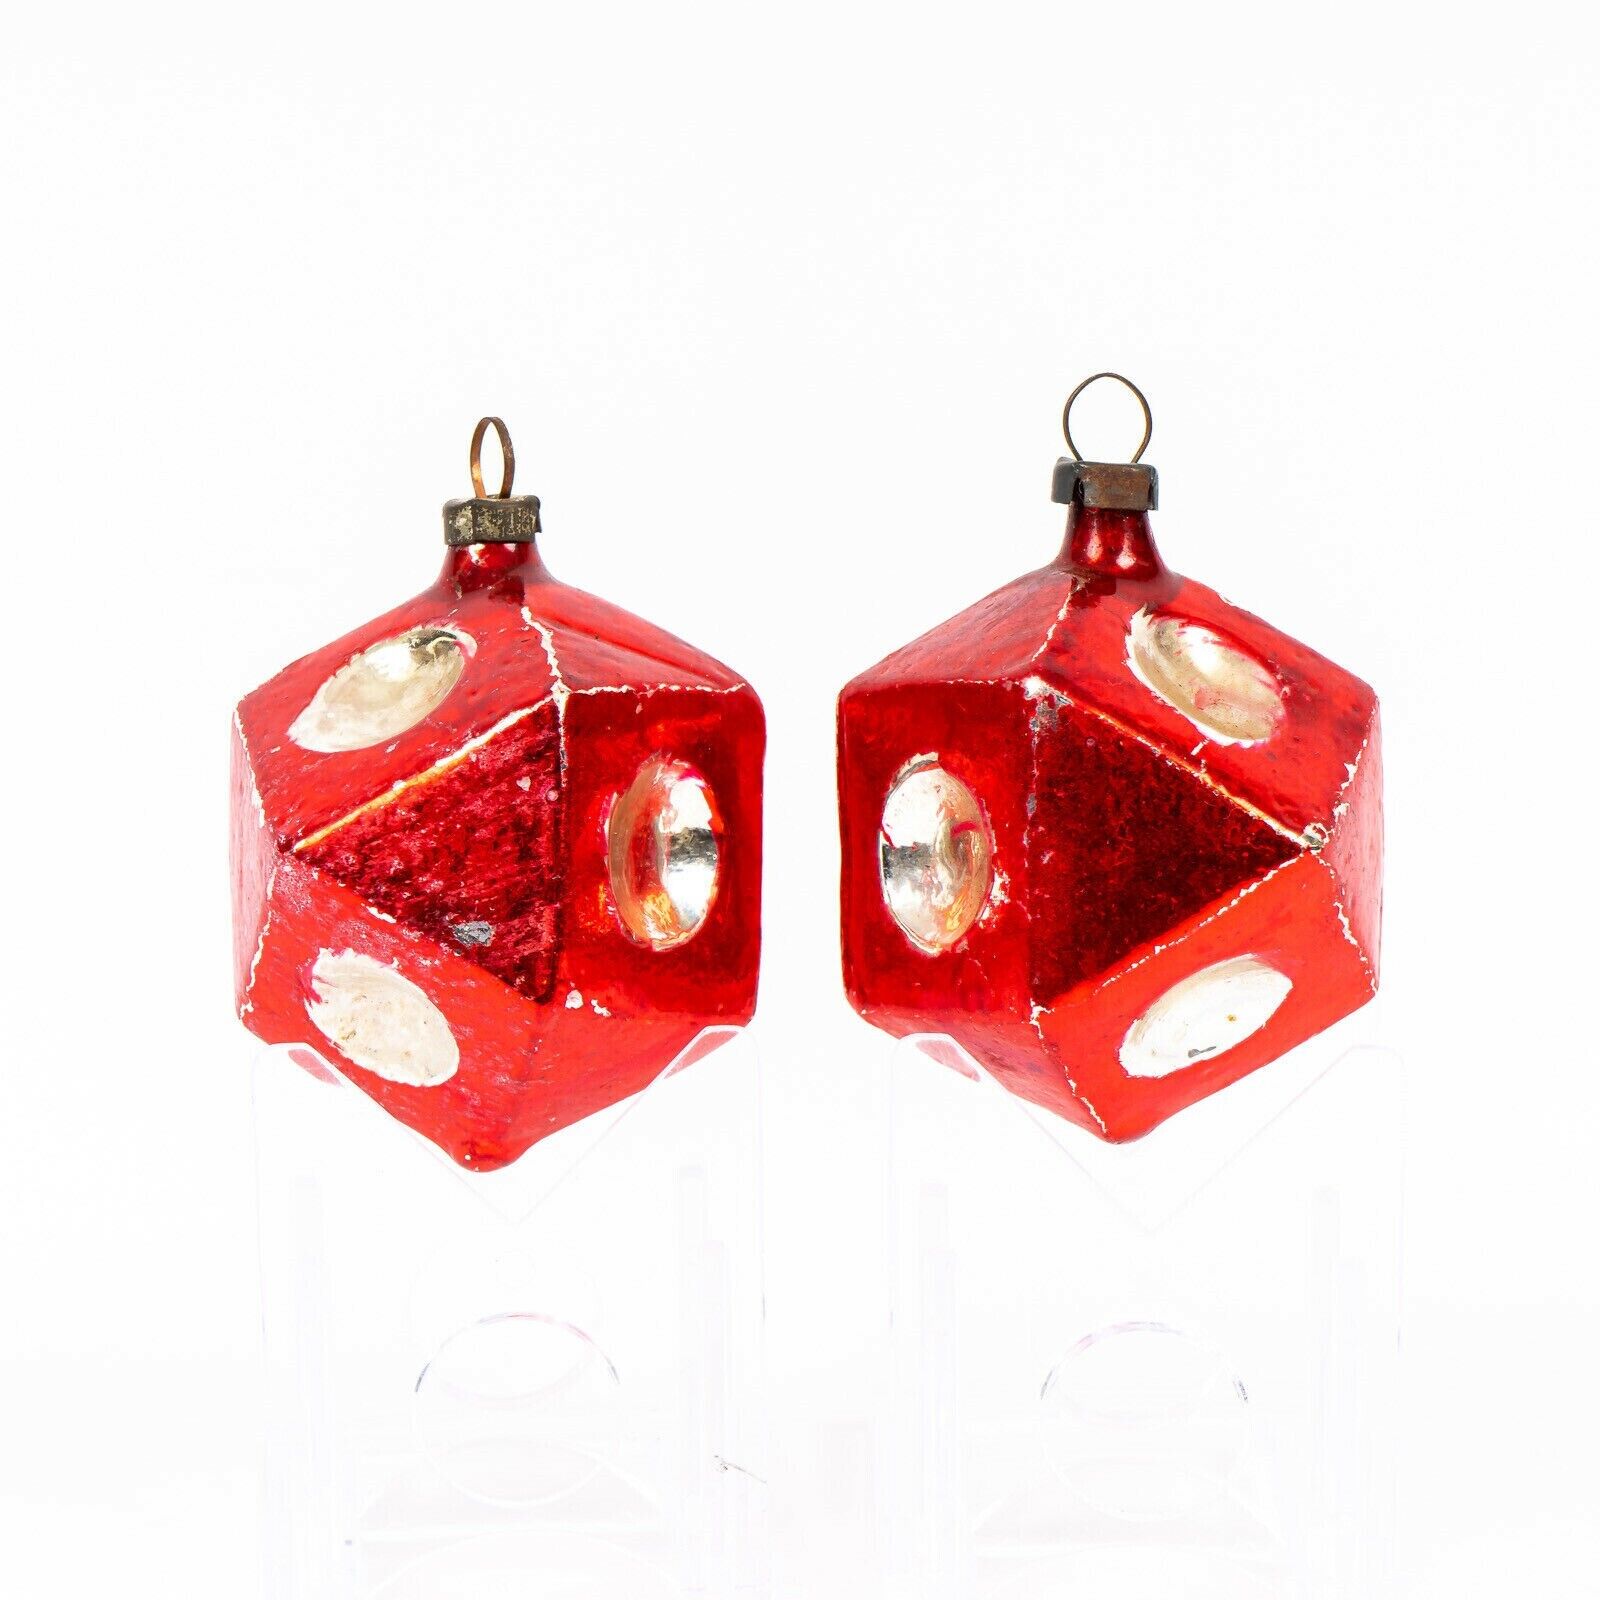 Pair Antique Red 14-Sided Geometric Shape Fancy Mold Christmas Ornaments Germany